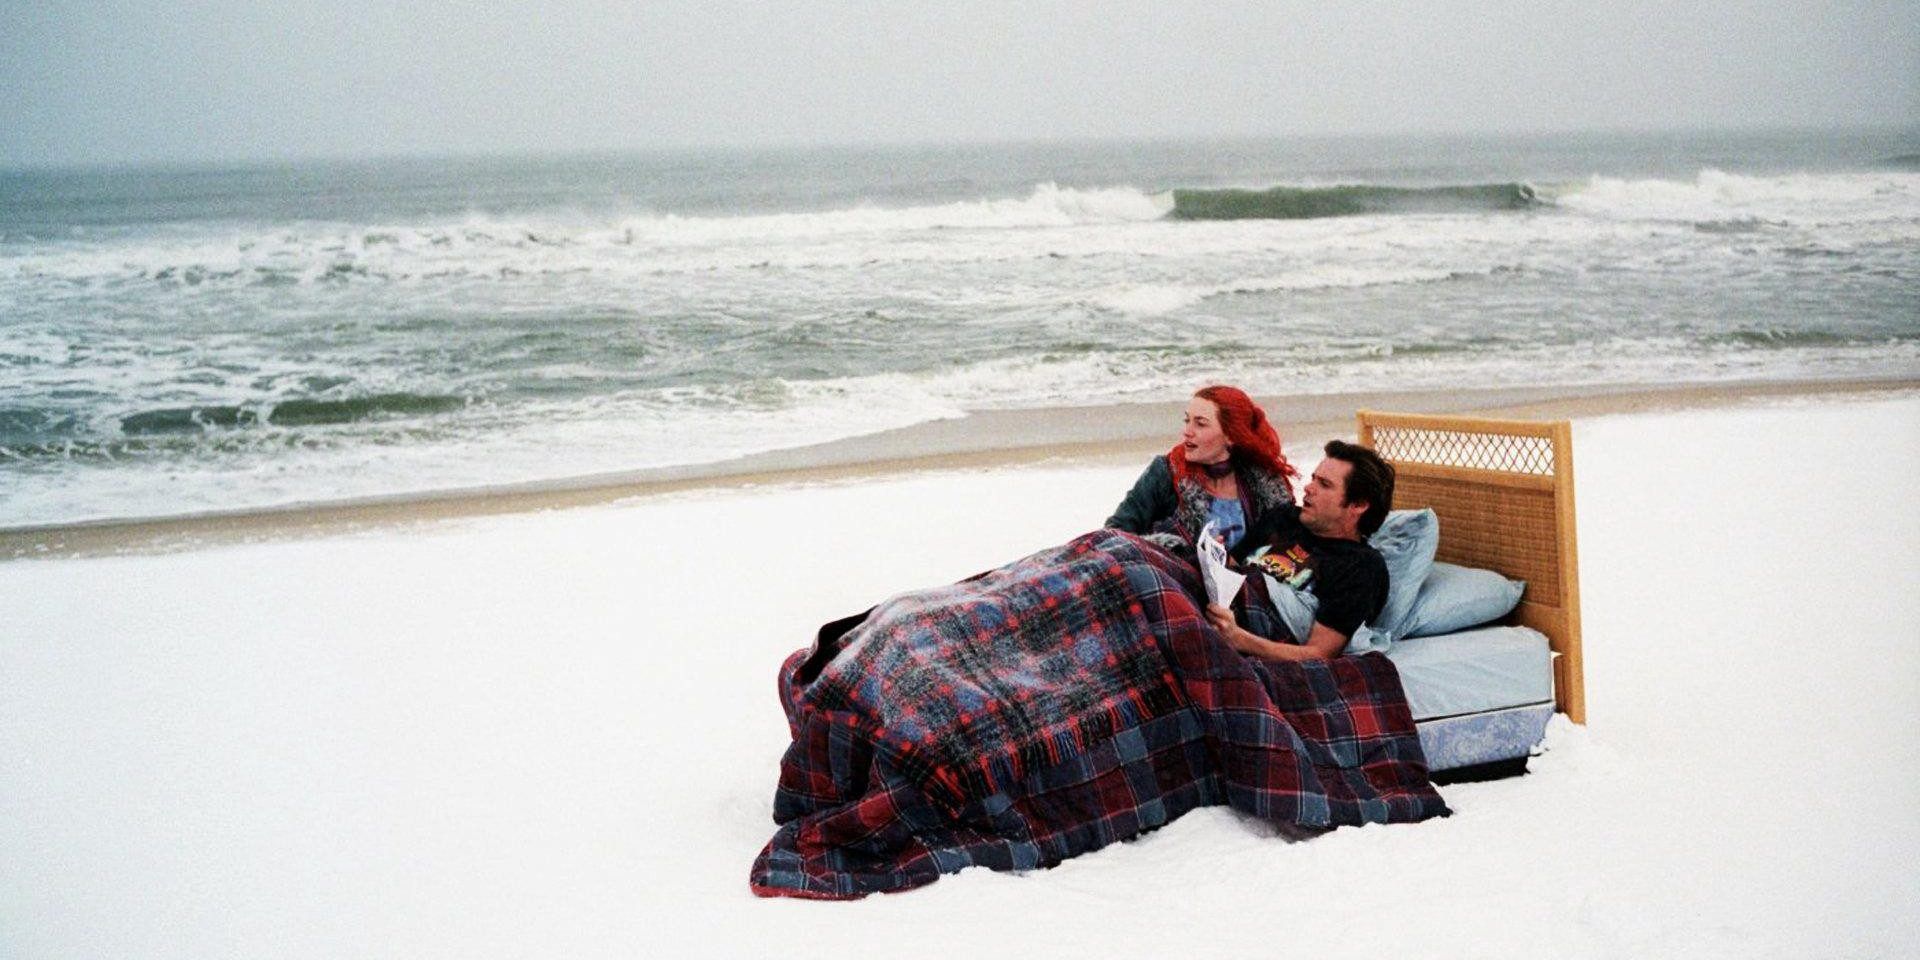 A couple in bed together at the beach